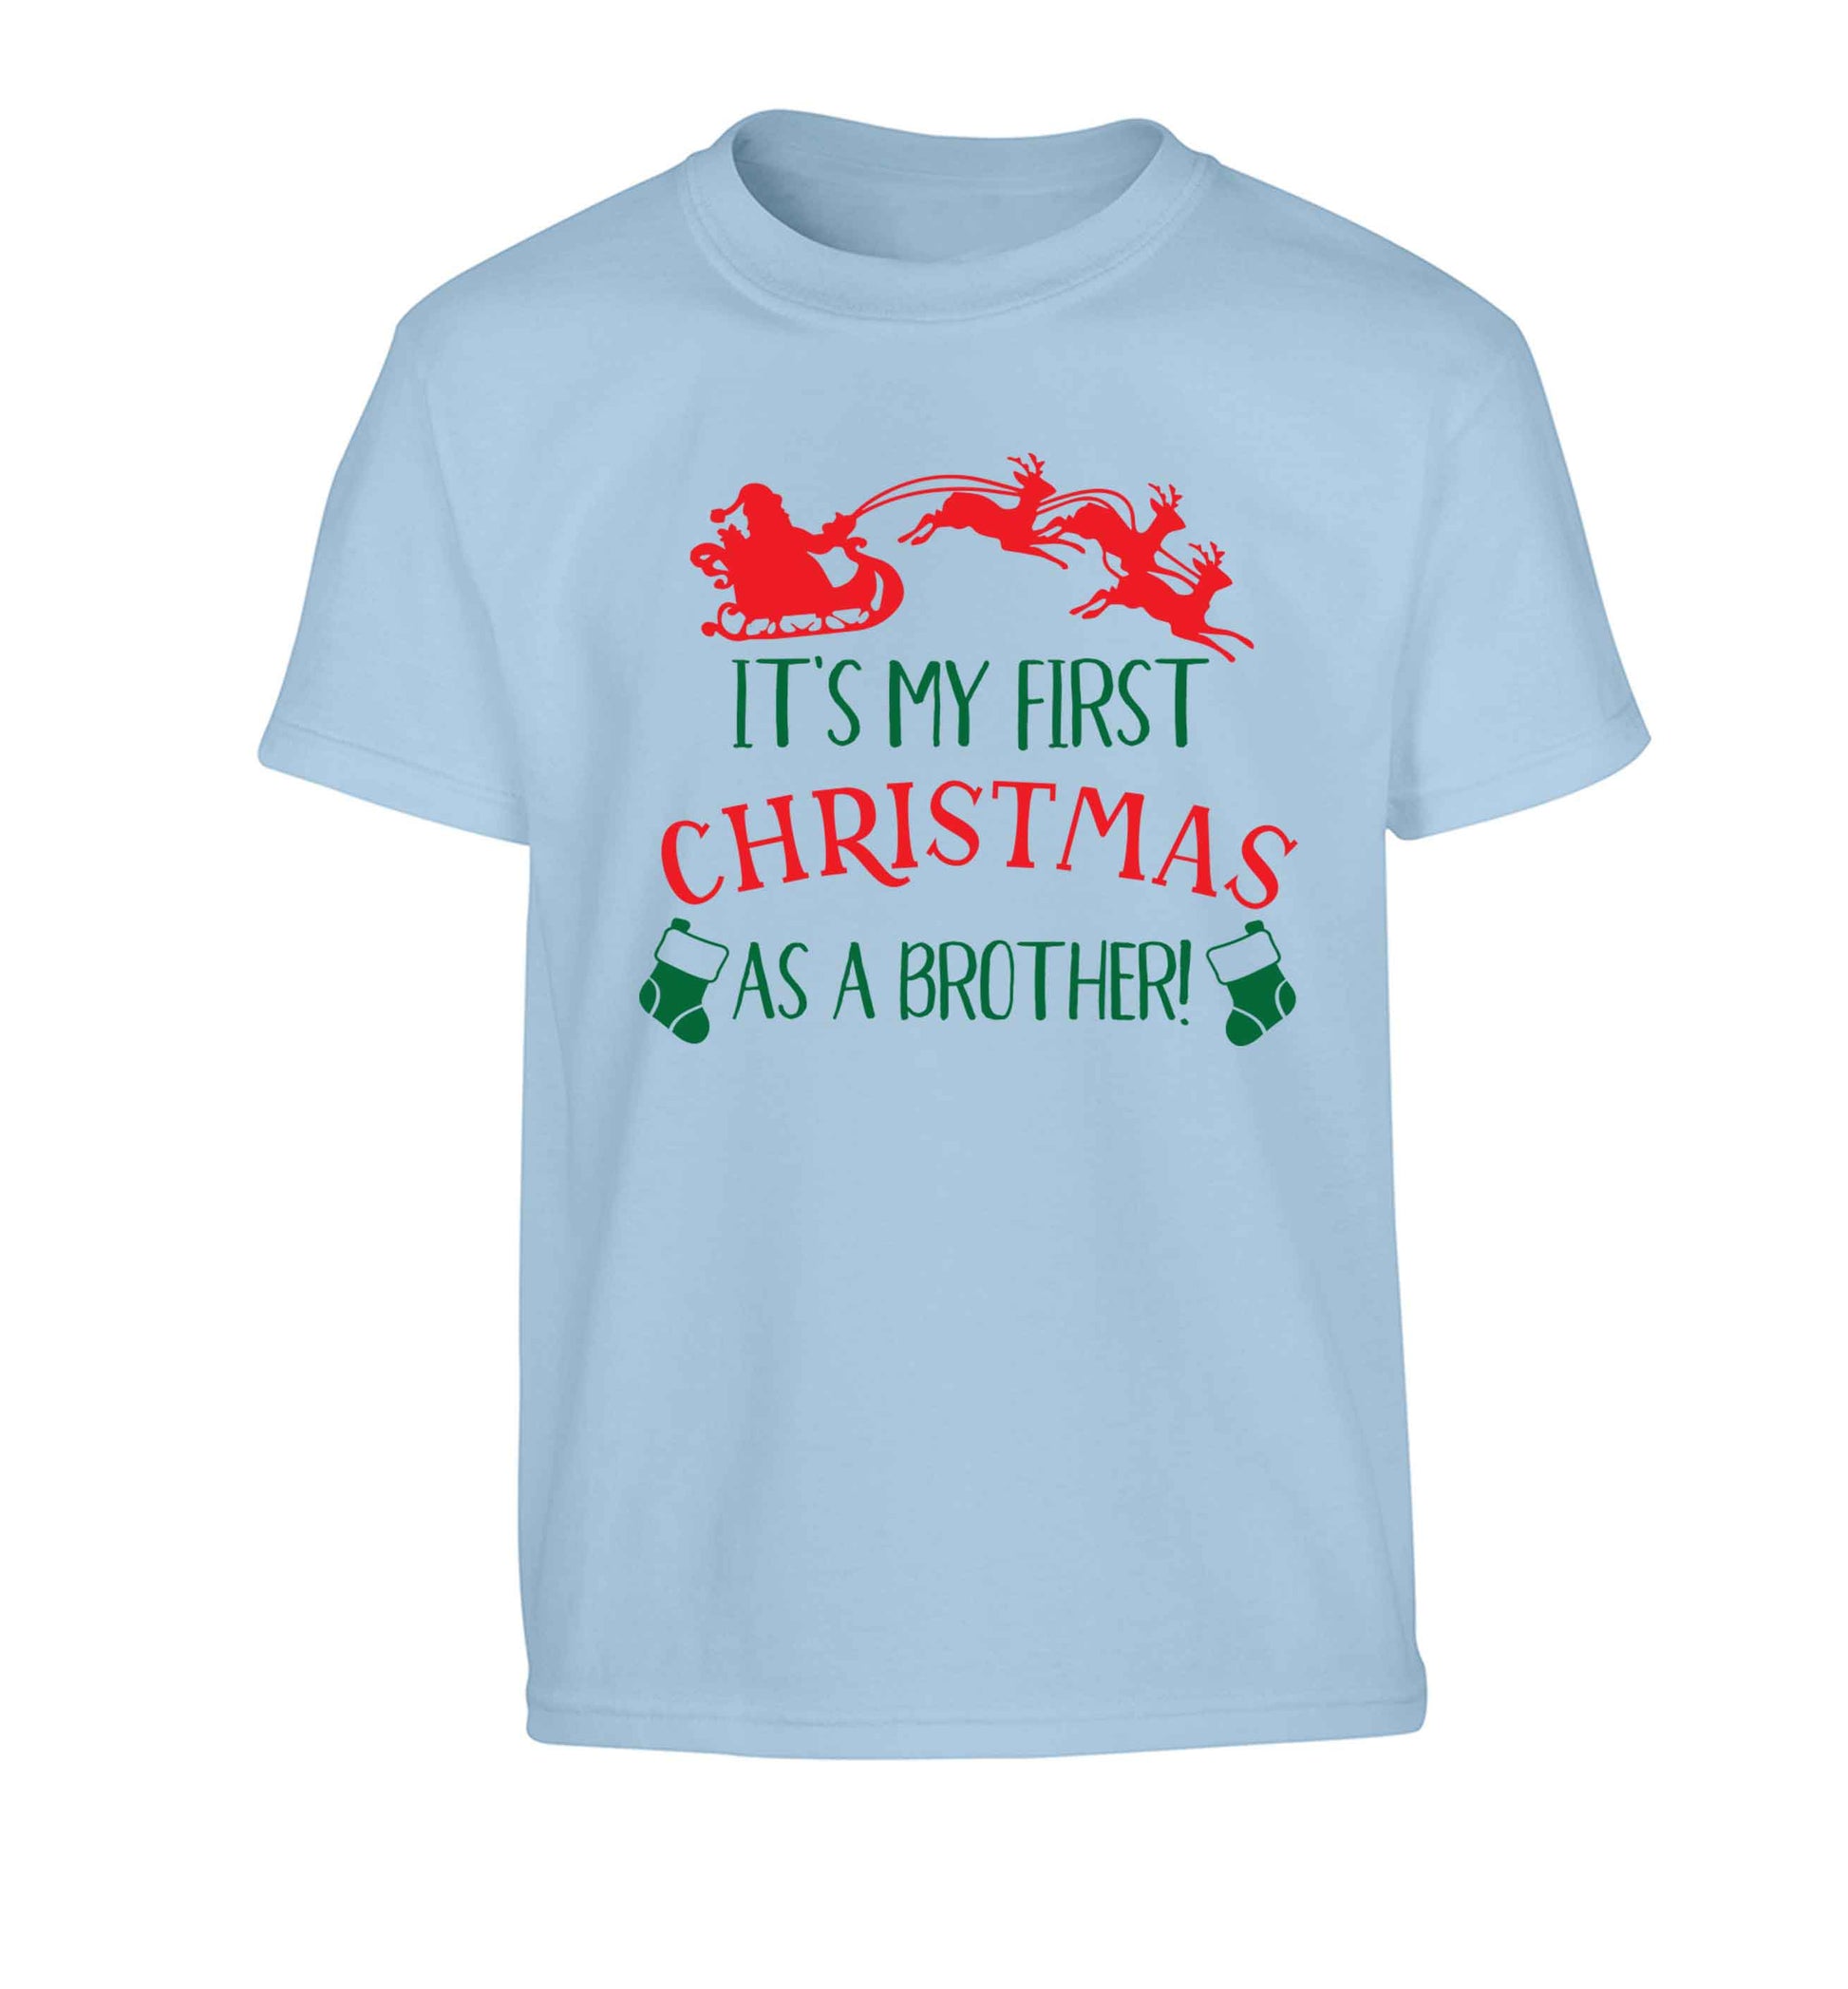 It's my first Christmas as a brother! Children's light blue Tshirt 12-13 Years